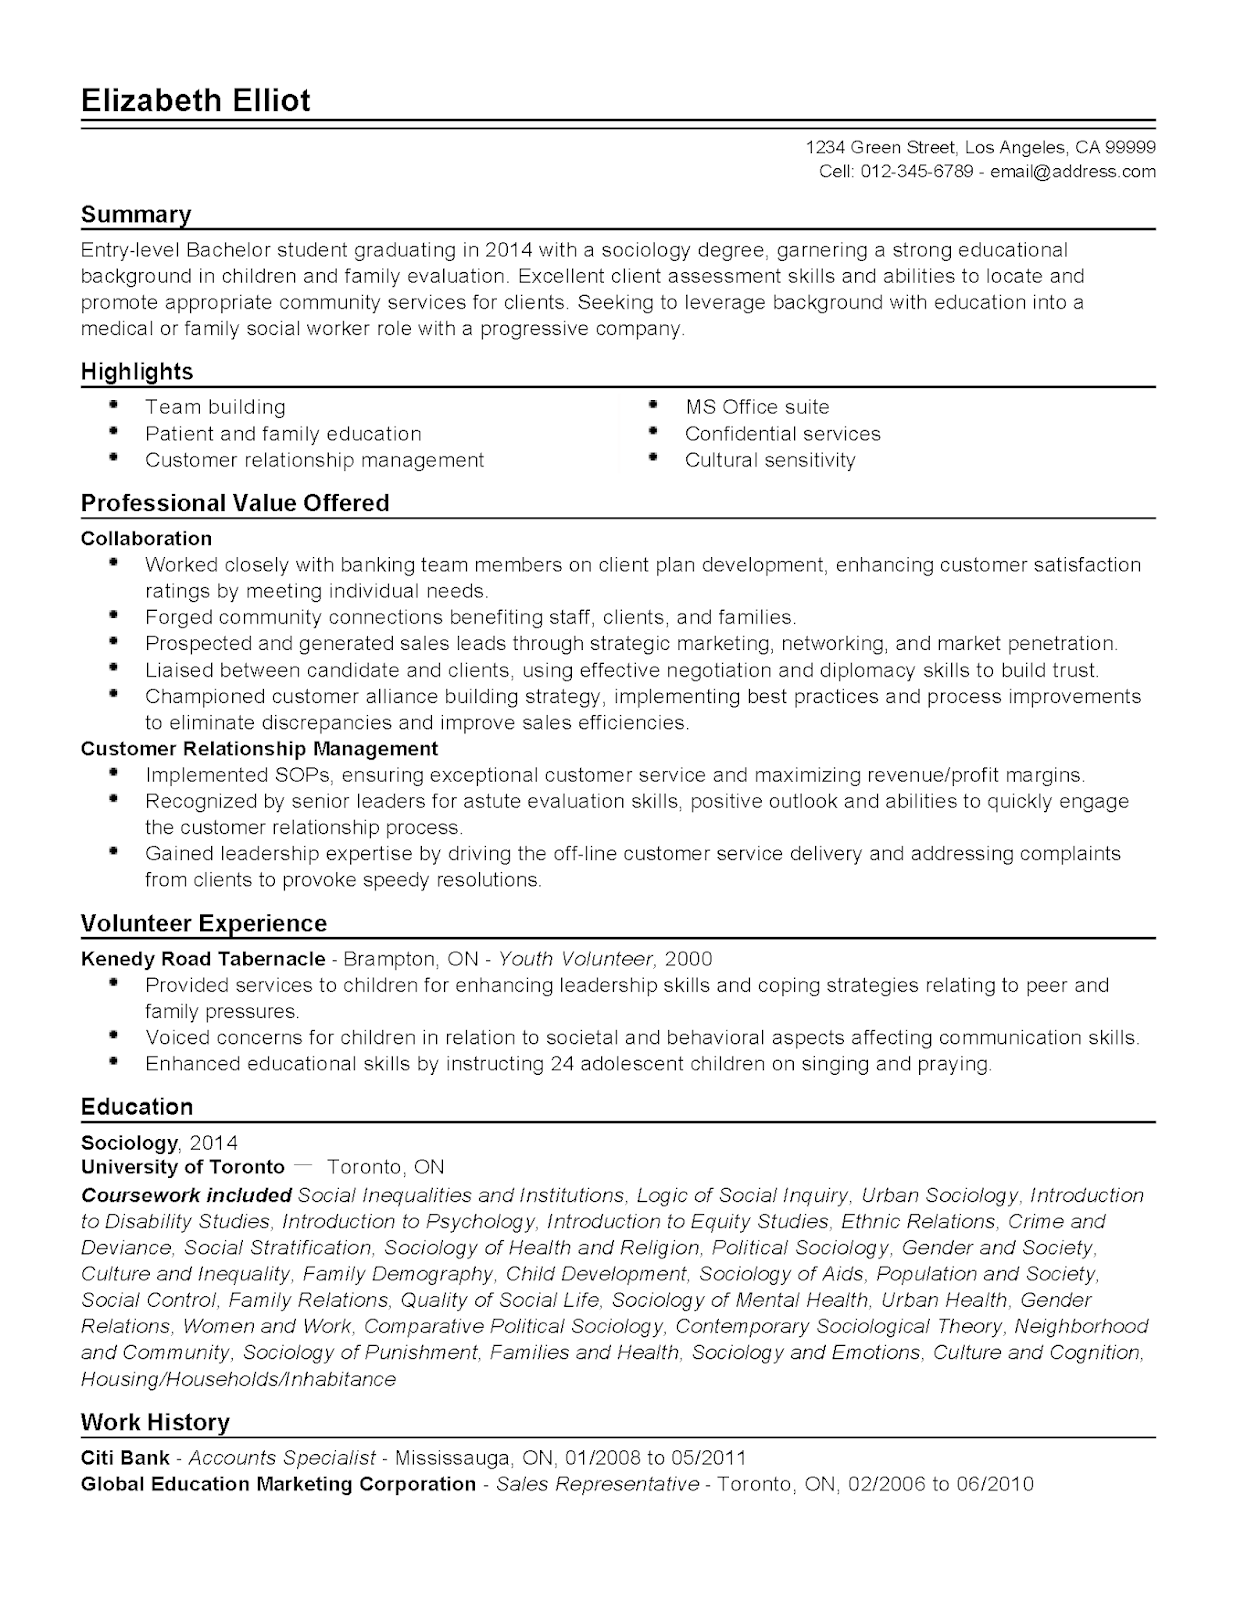 Cafeteria Worker Resume Example 2019 Cafeteria Worker Resume Template 2020,cafeteria worker resume cafeteria worker resume example cafeteria worker resume template